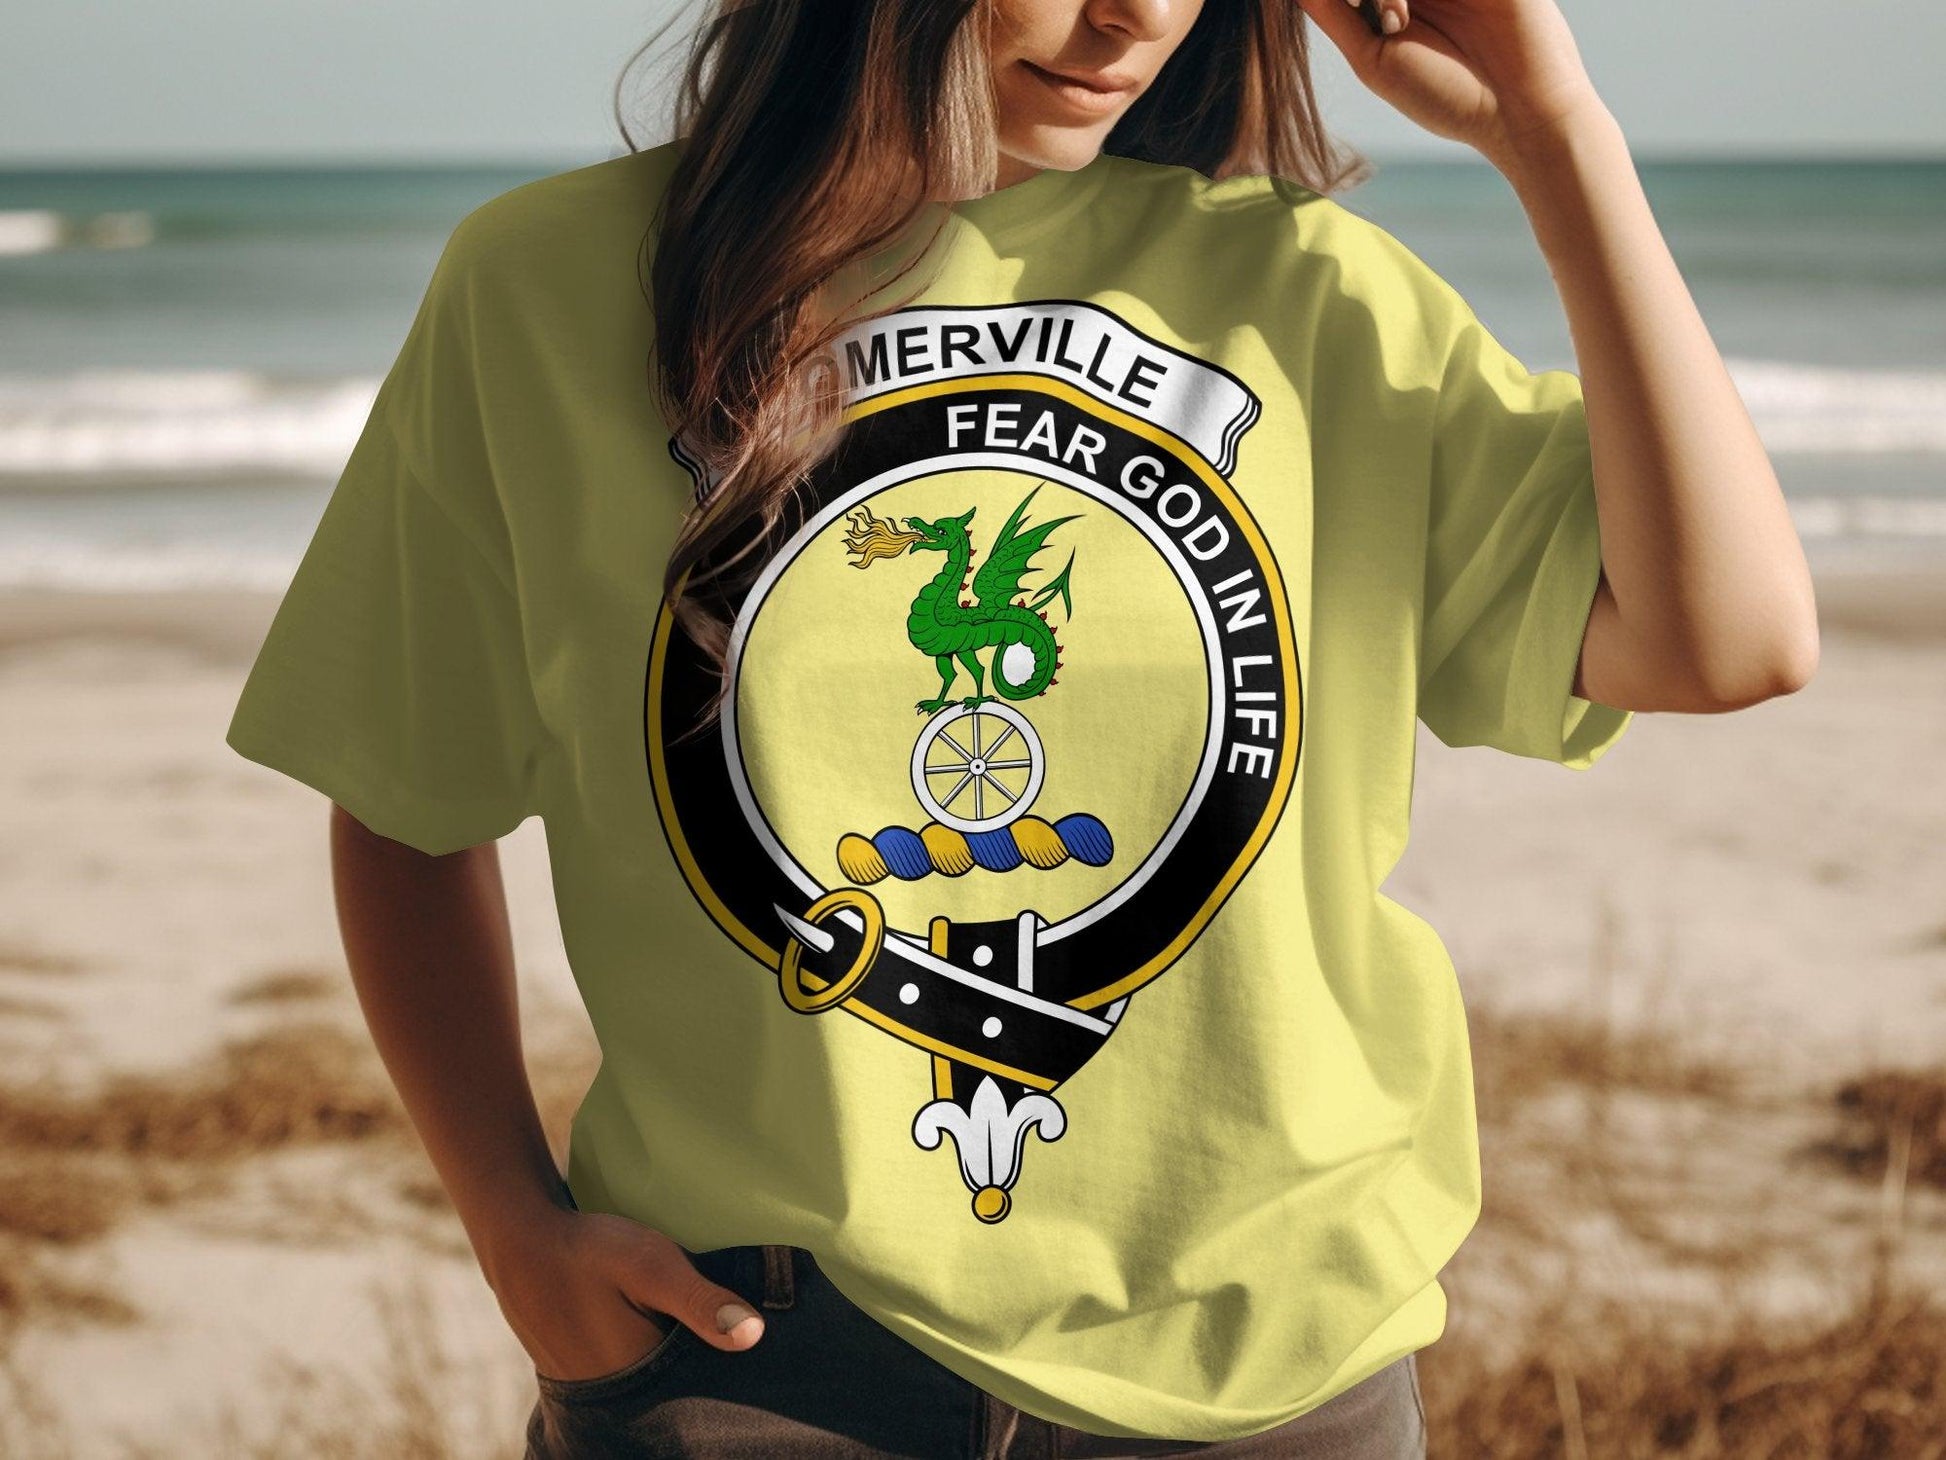 Somerville Crest Fear God in Life Clan Crest T-Shirt - Living Stone Gifts